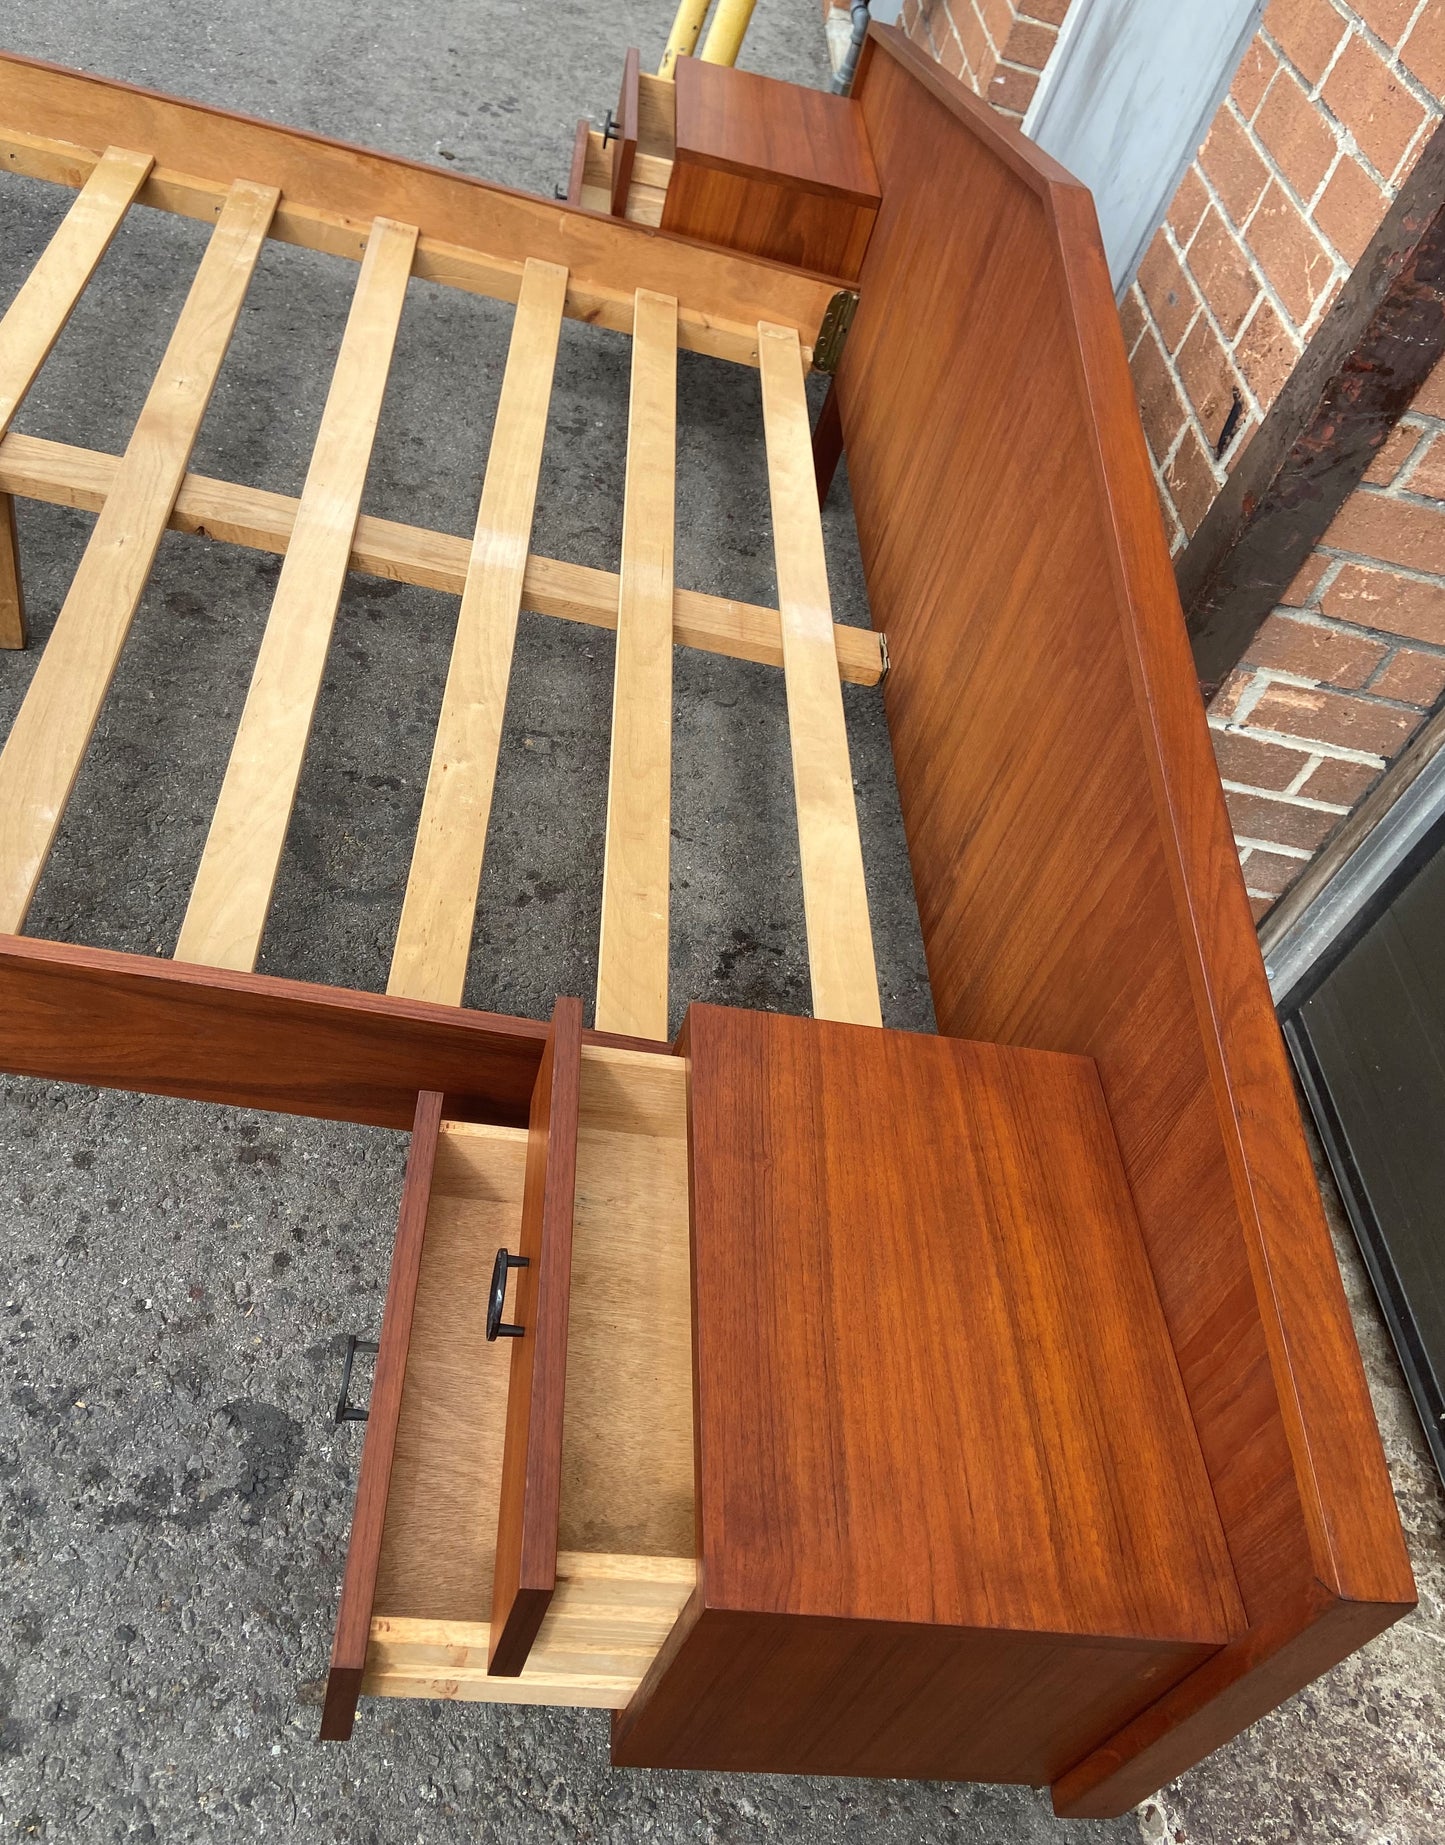 REFINISHED Mid Century Modern Teak Bed w floating nightstands Queen, PERFECT